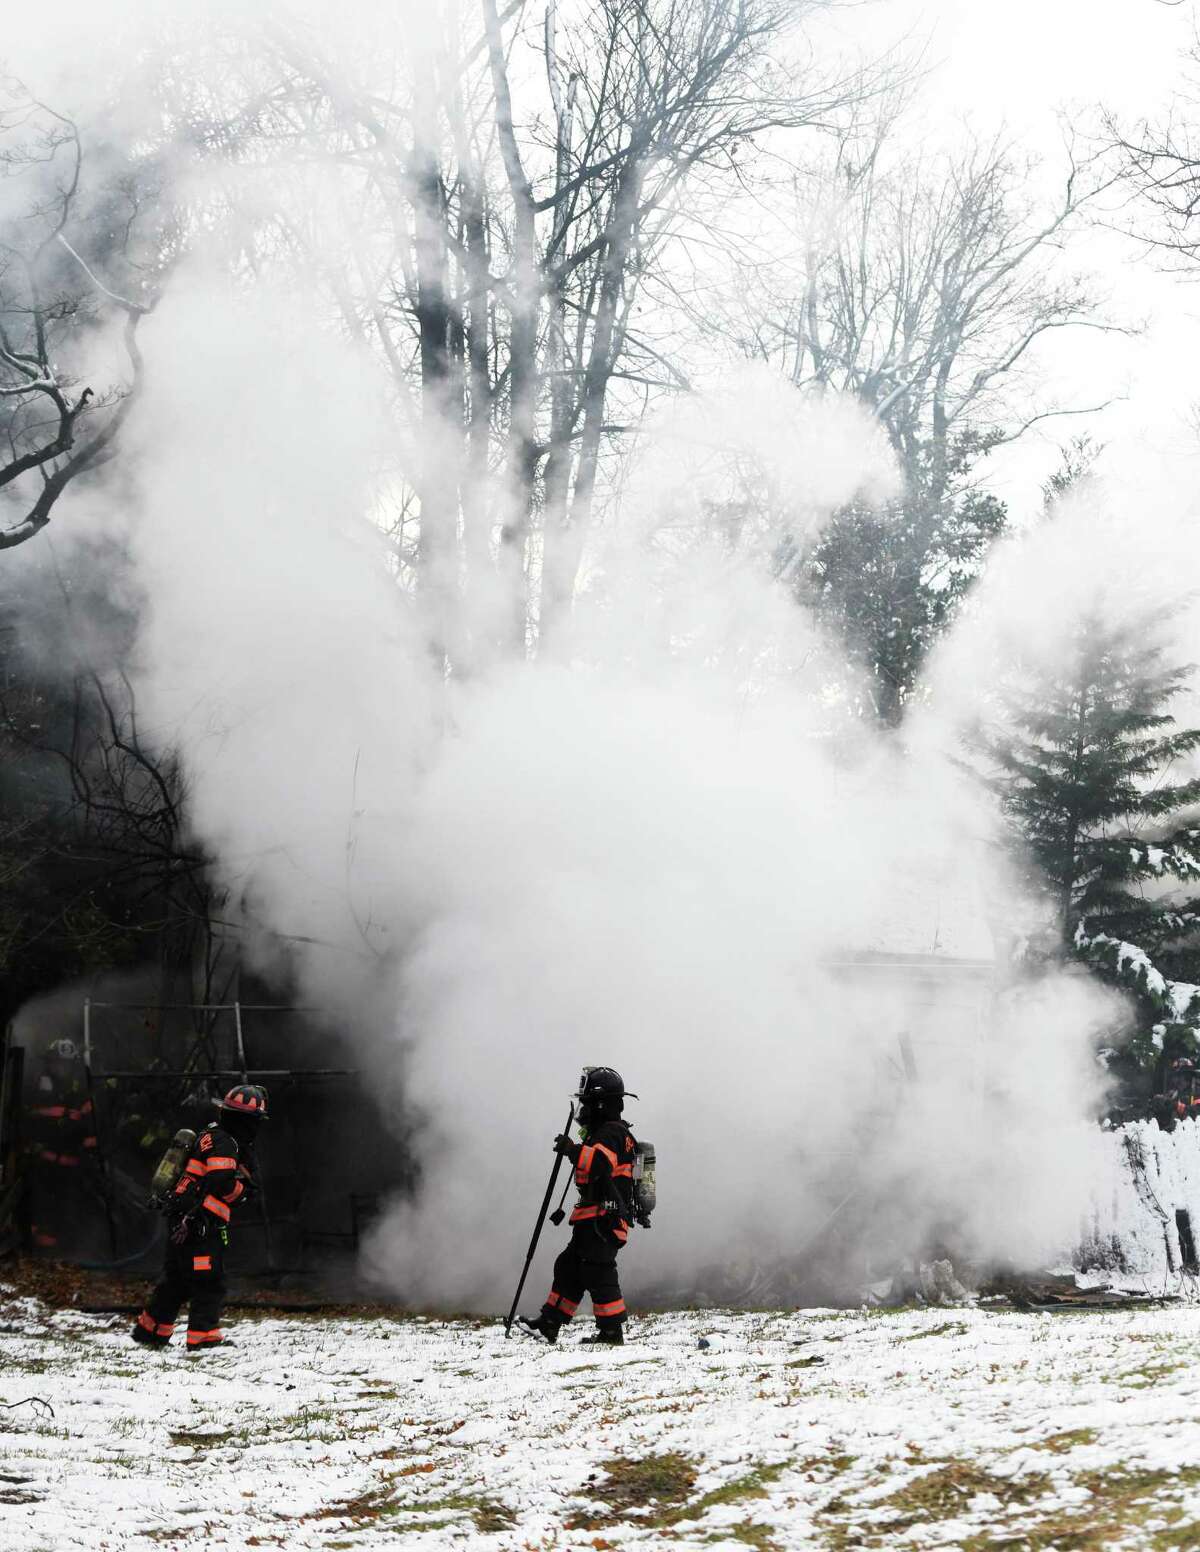 Greenwich firefighters respond to a two-car garage fire on Tomac Court in Old Greenwich, Conn. Wednesday, Dec. 11, 2019. The detached two-car garage was ablaze when firefighters arrived on scene and was extinguished in 19 minutes without any injuries or damage to adjoining structures.